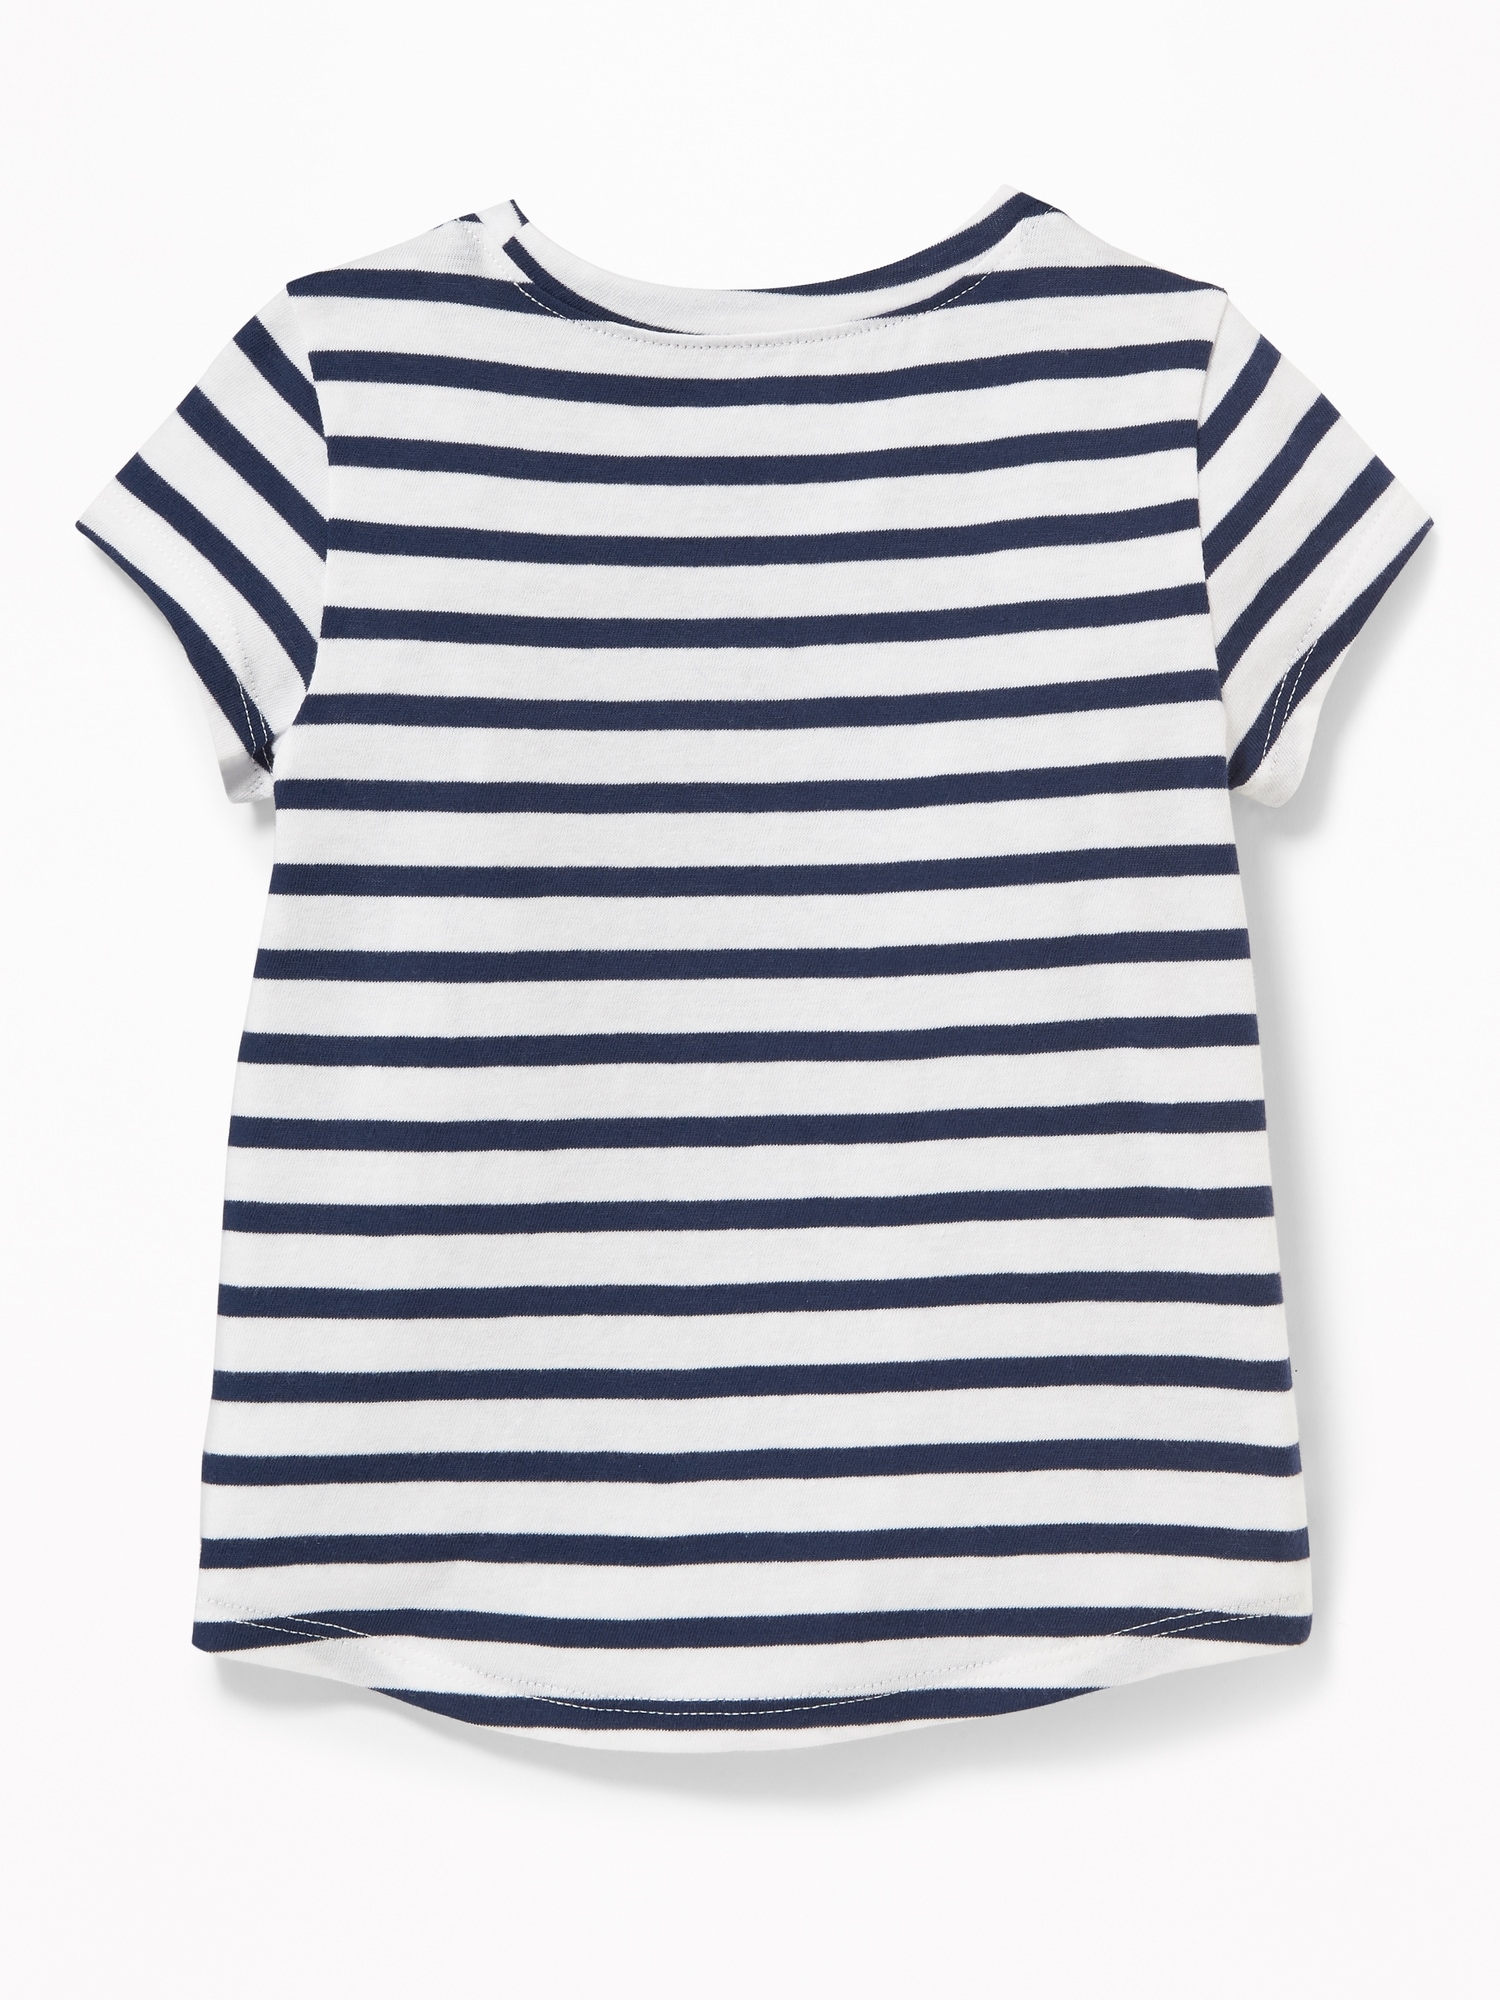 Printed Jersey Tee for Toddler Girls | Old Navy